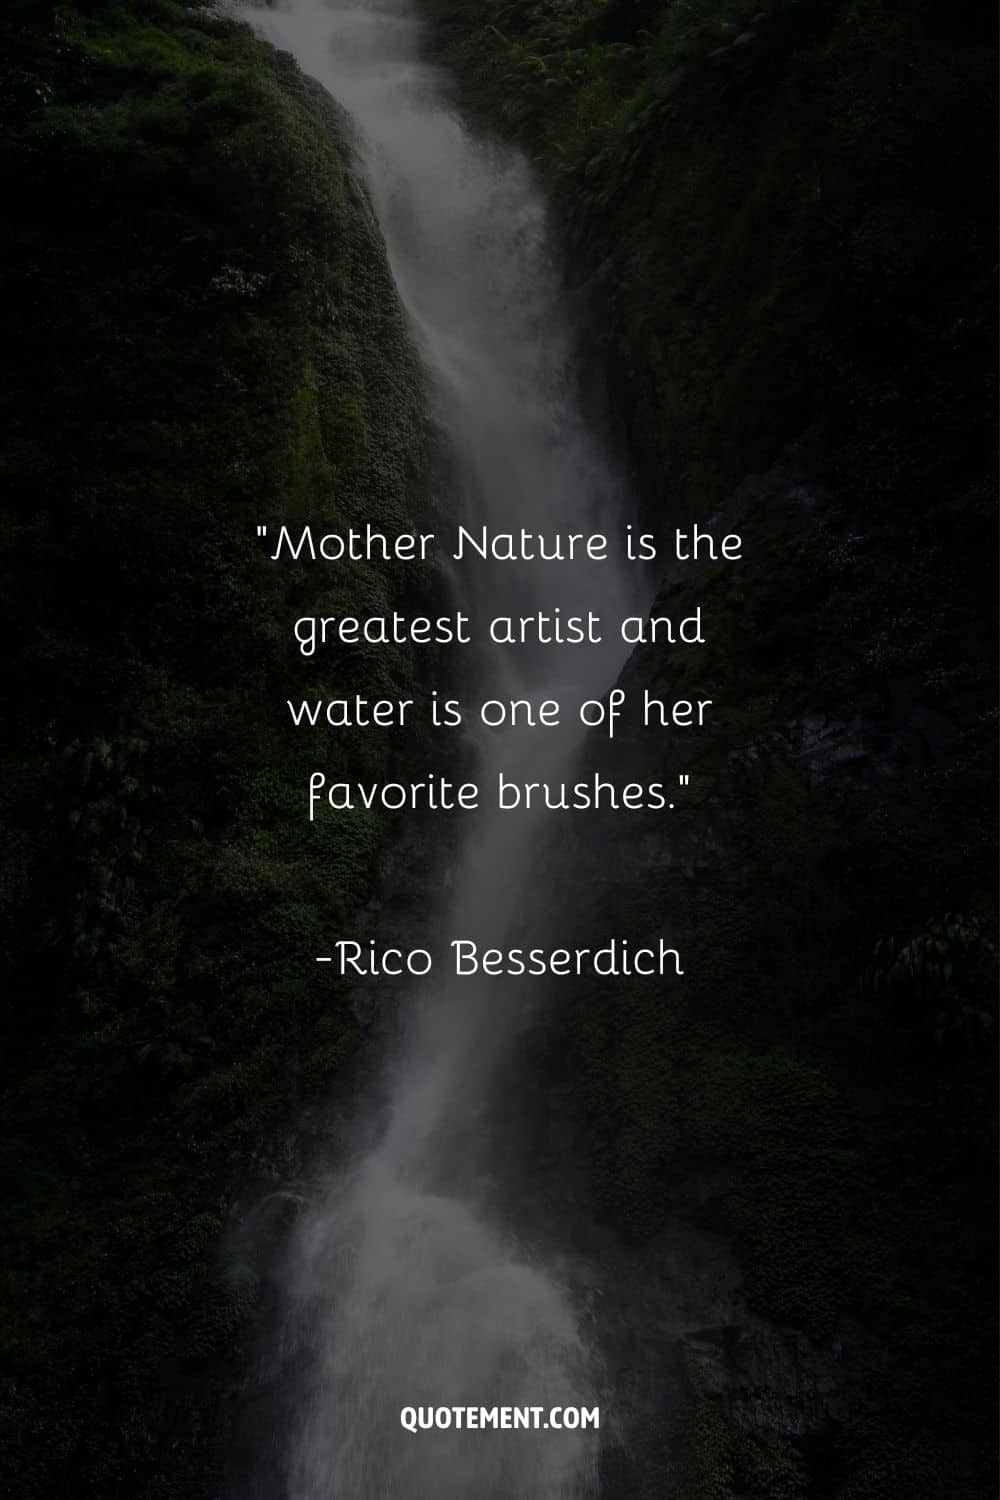 Powerful quote on Mother Nature and water, and a waterfall in the background, too
